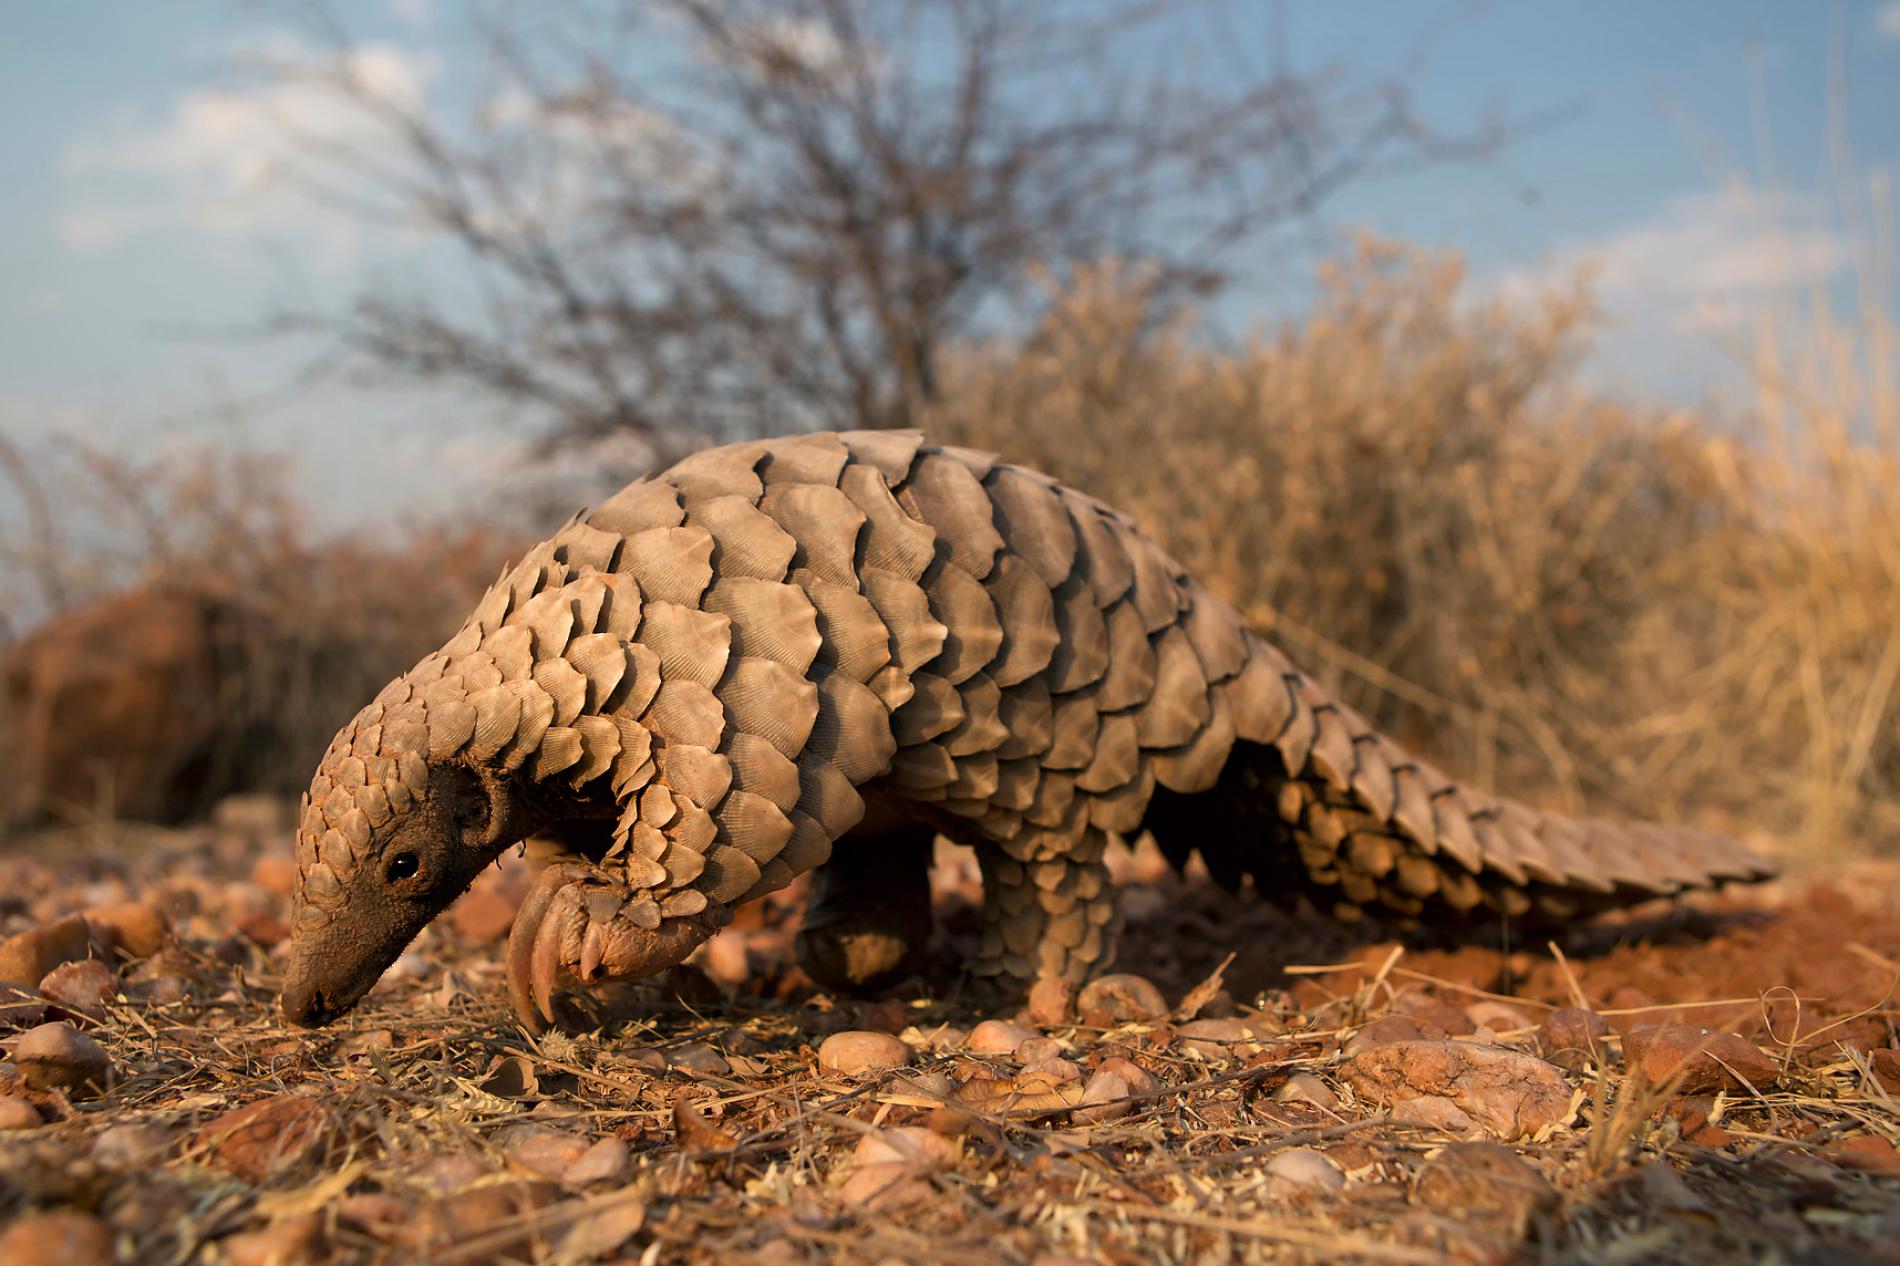 A Ground Pangolin is shown here in Namibia by Elyane and Cedric Jacquet